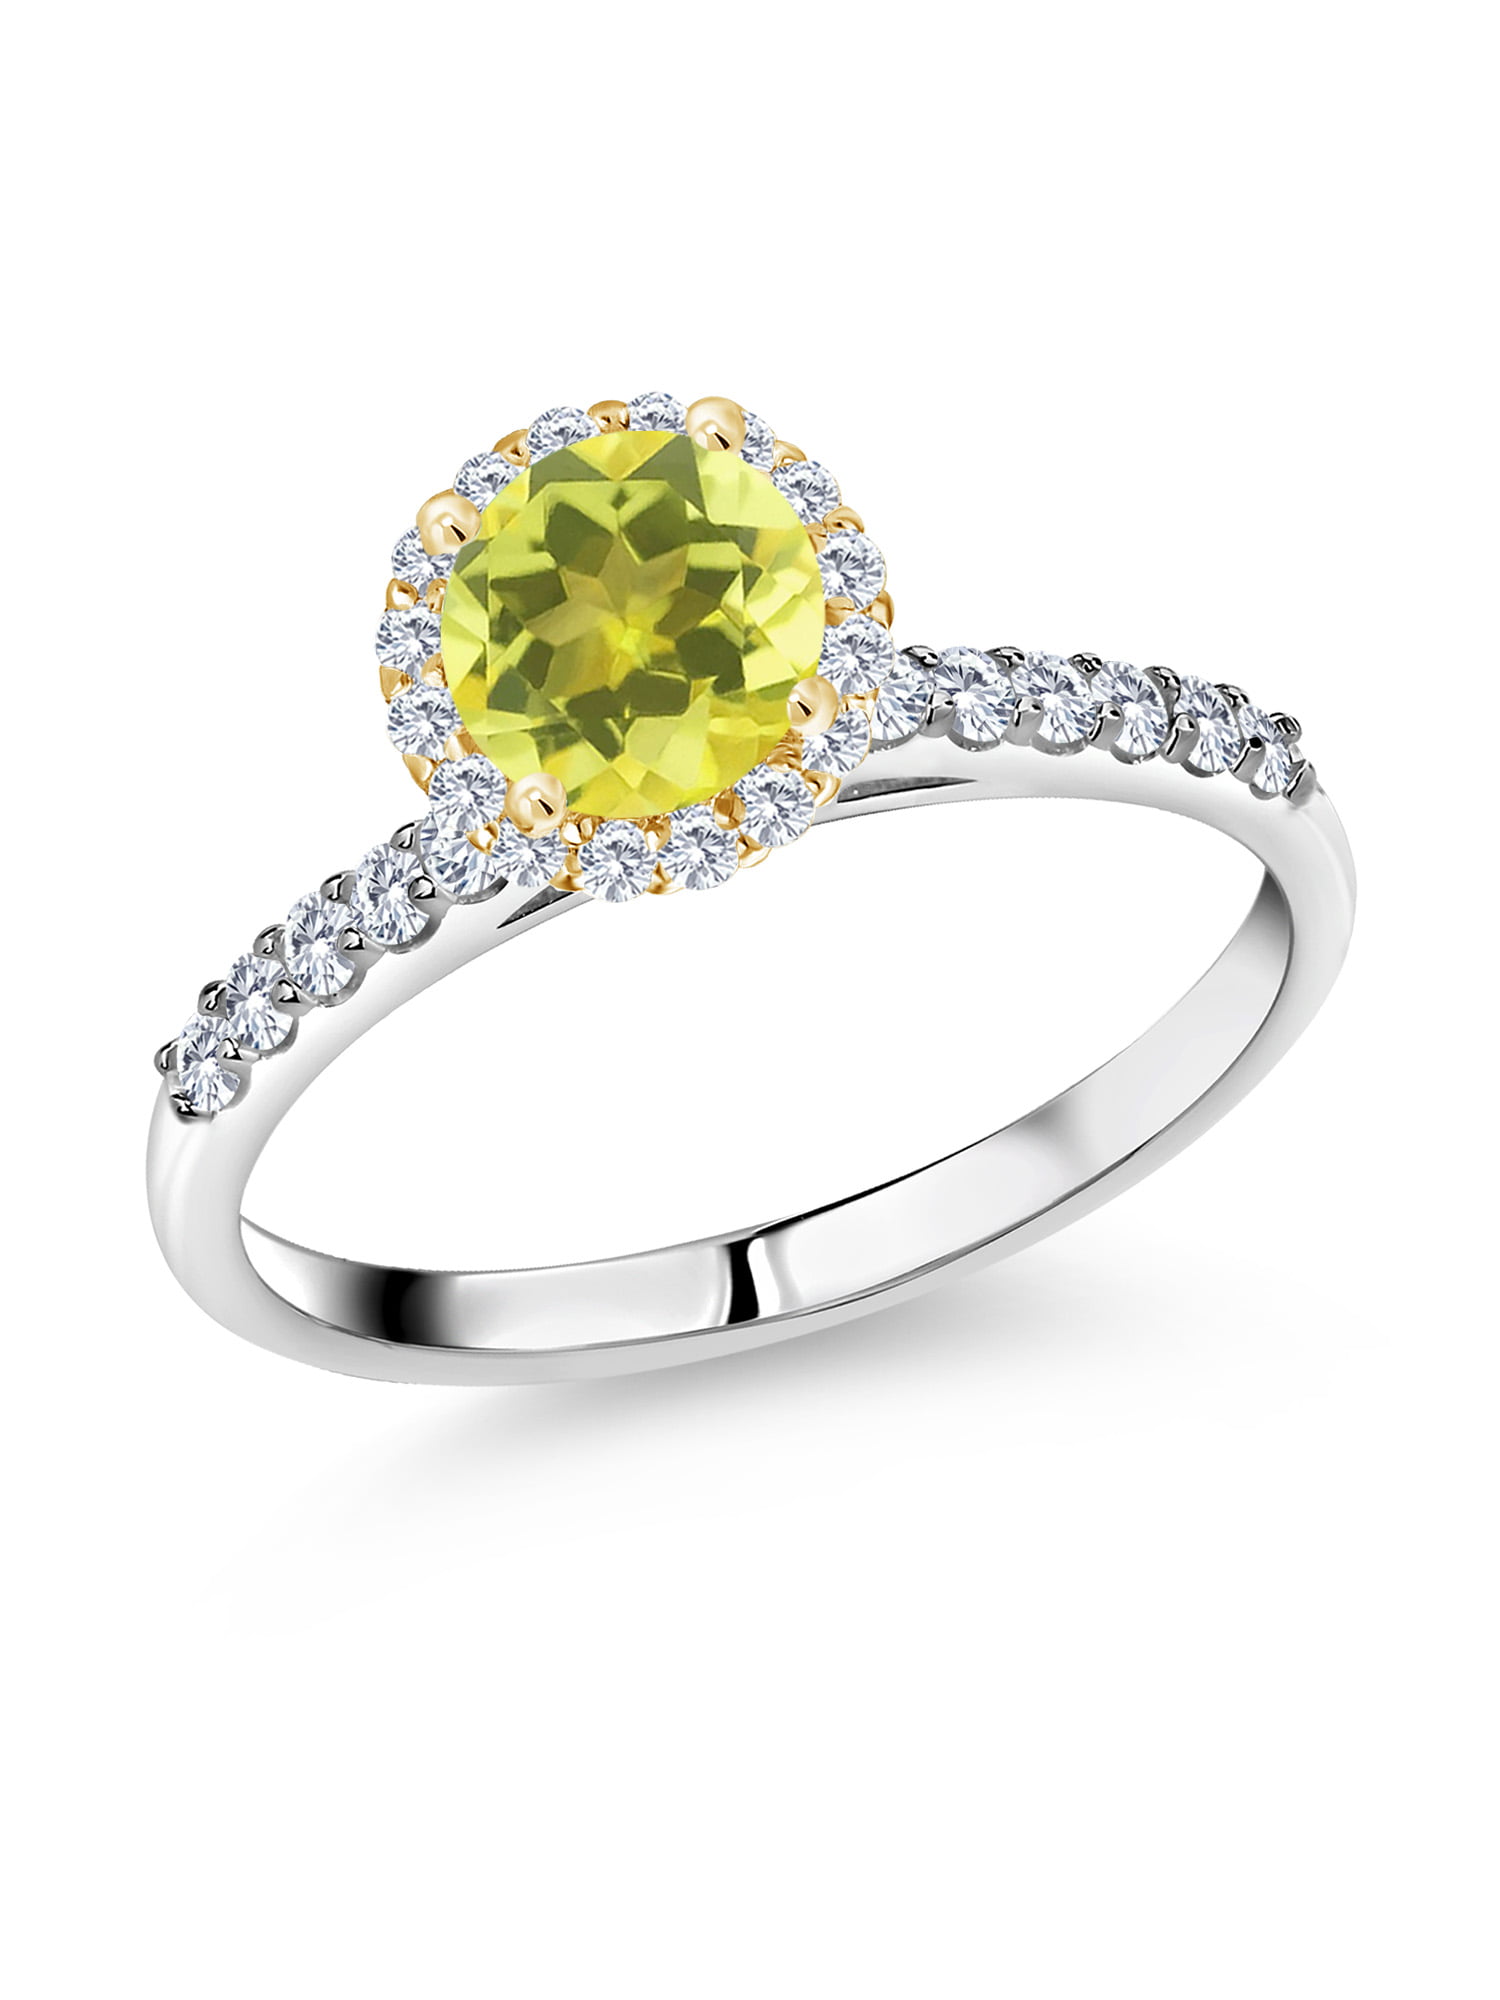 925 Sterling Silver Engagement Ring Vintage Halo 2 Ct Yellow Canary Lab Diamond 